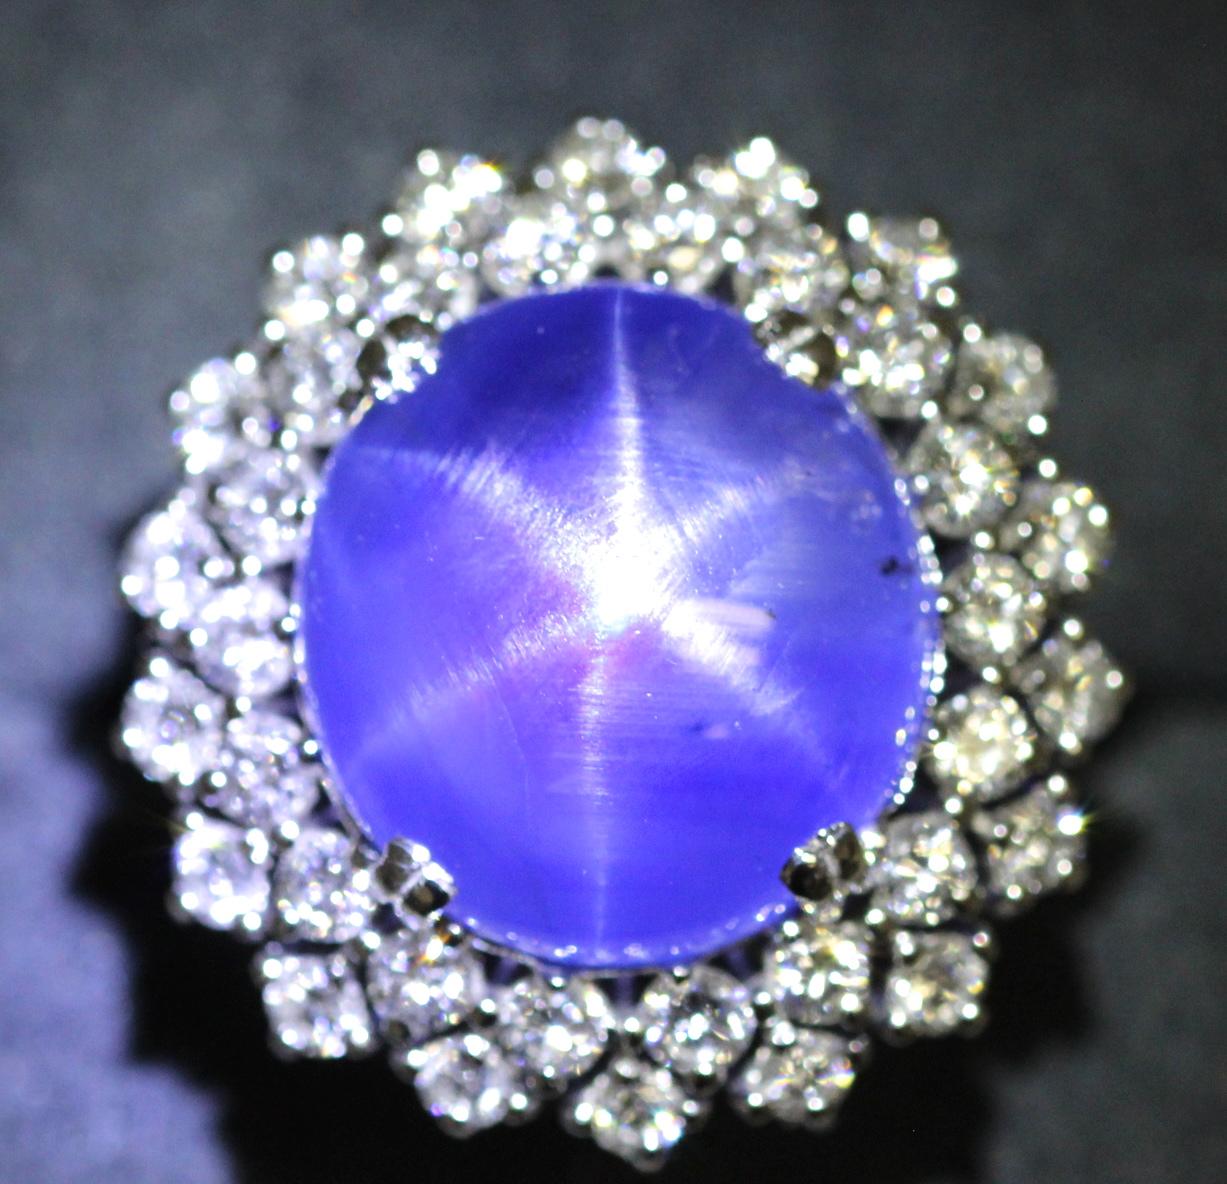 A 1980's Vintage star sapphire and diamond ring. This cocktail ring features a natural, no treatment Ceylon star sapphire weighing approximately 21 carats. The Star sapphire is round domed cabochon shape with a rich cornflower blue appearance. We